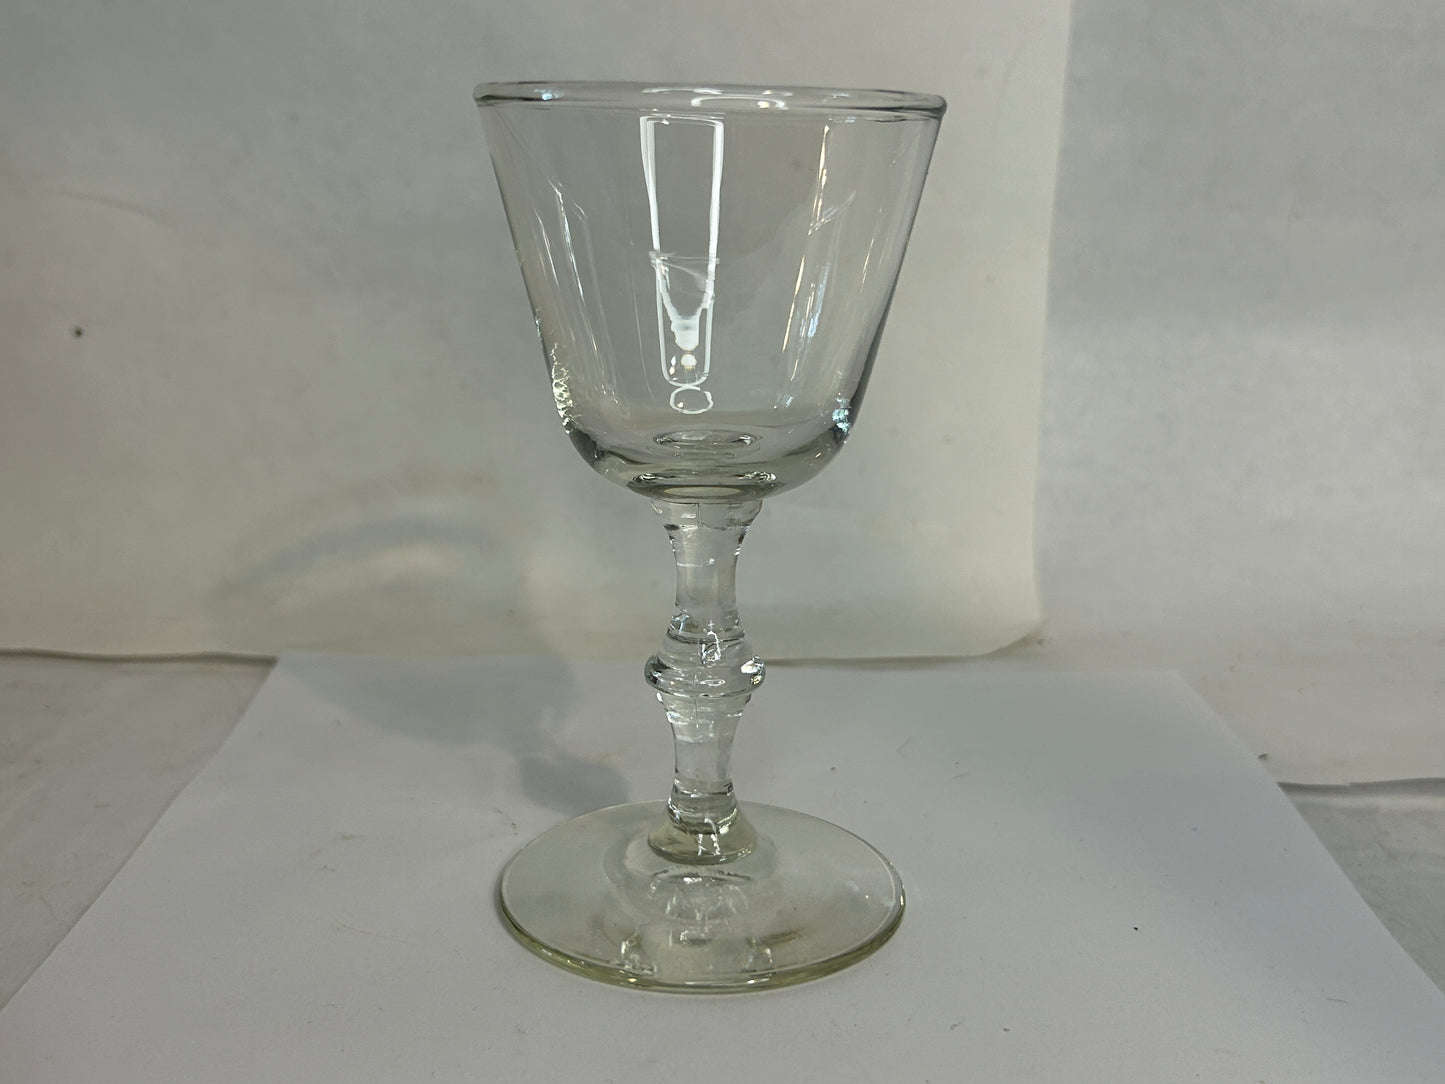 Vintage, Mid-Century Flawless, Heavy Crystal Cordial Glass